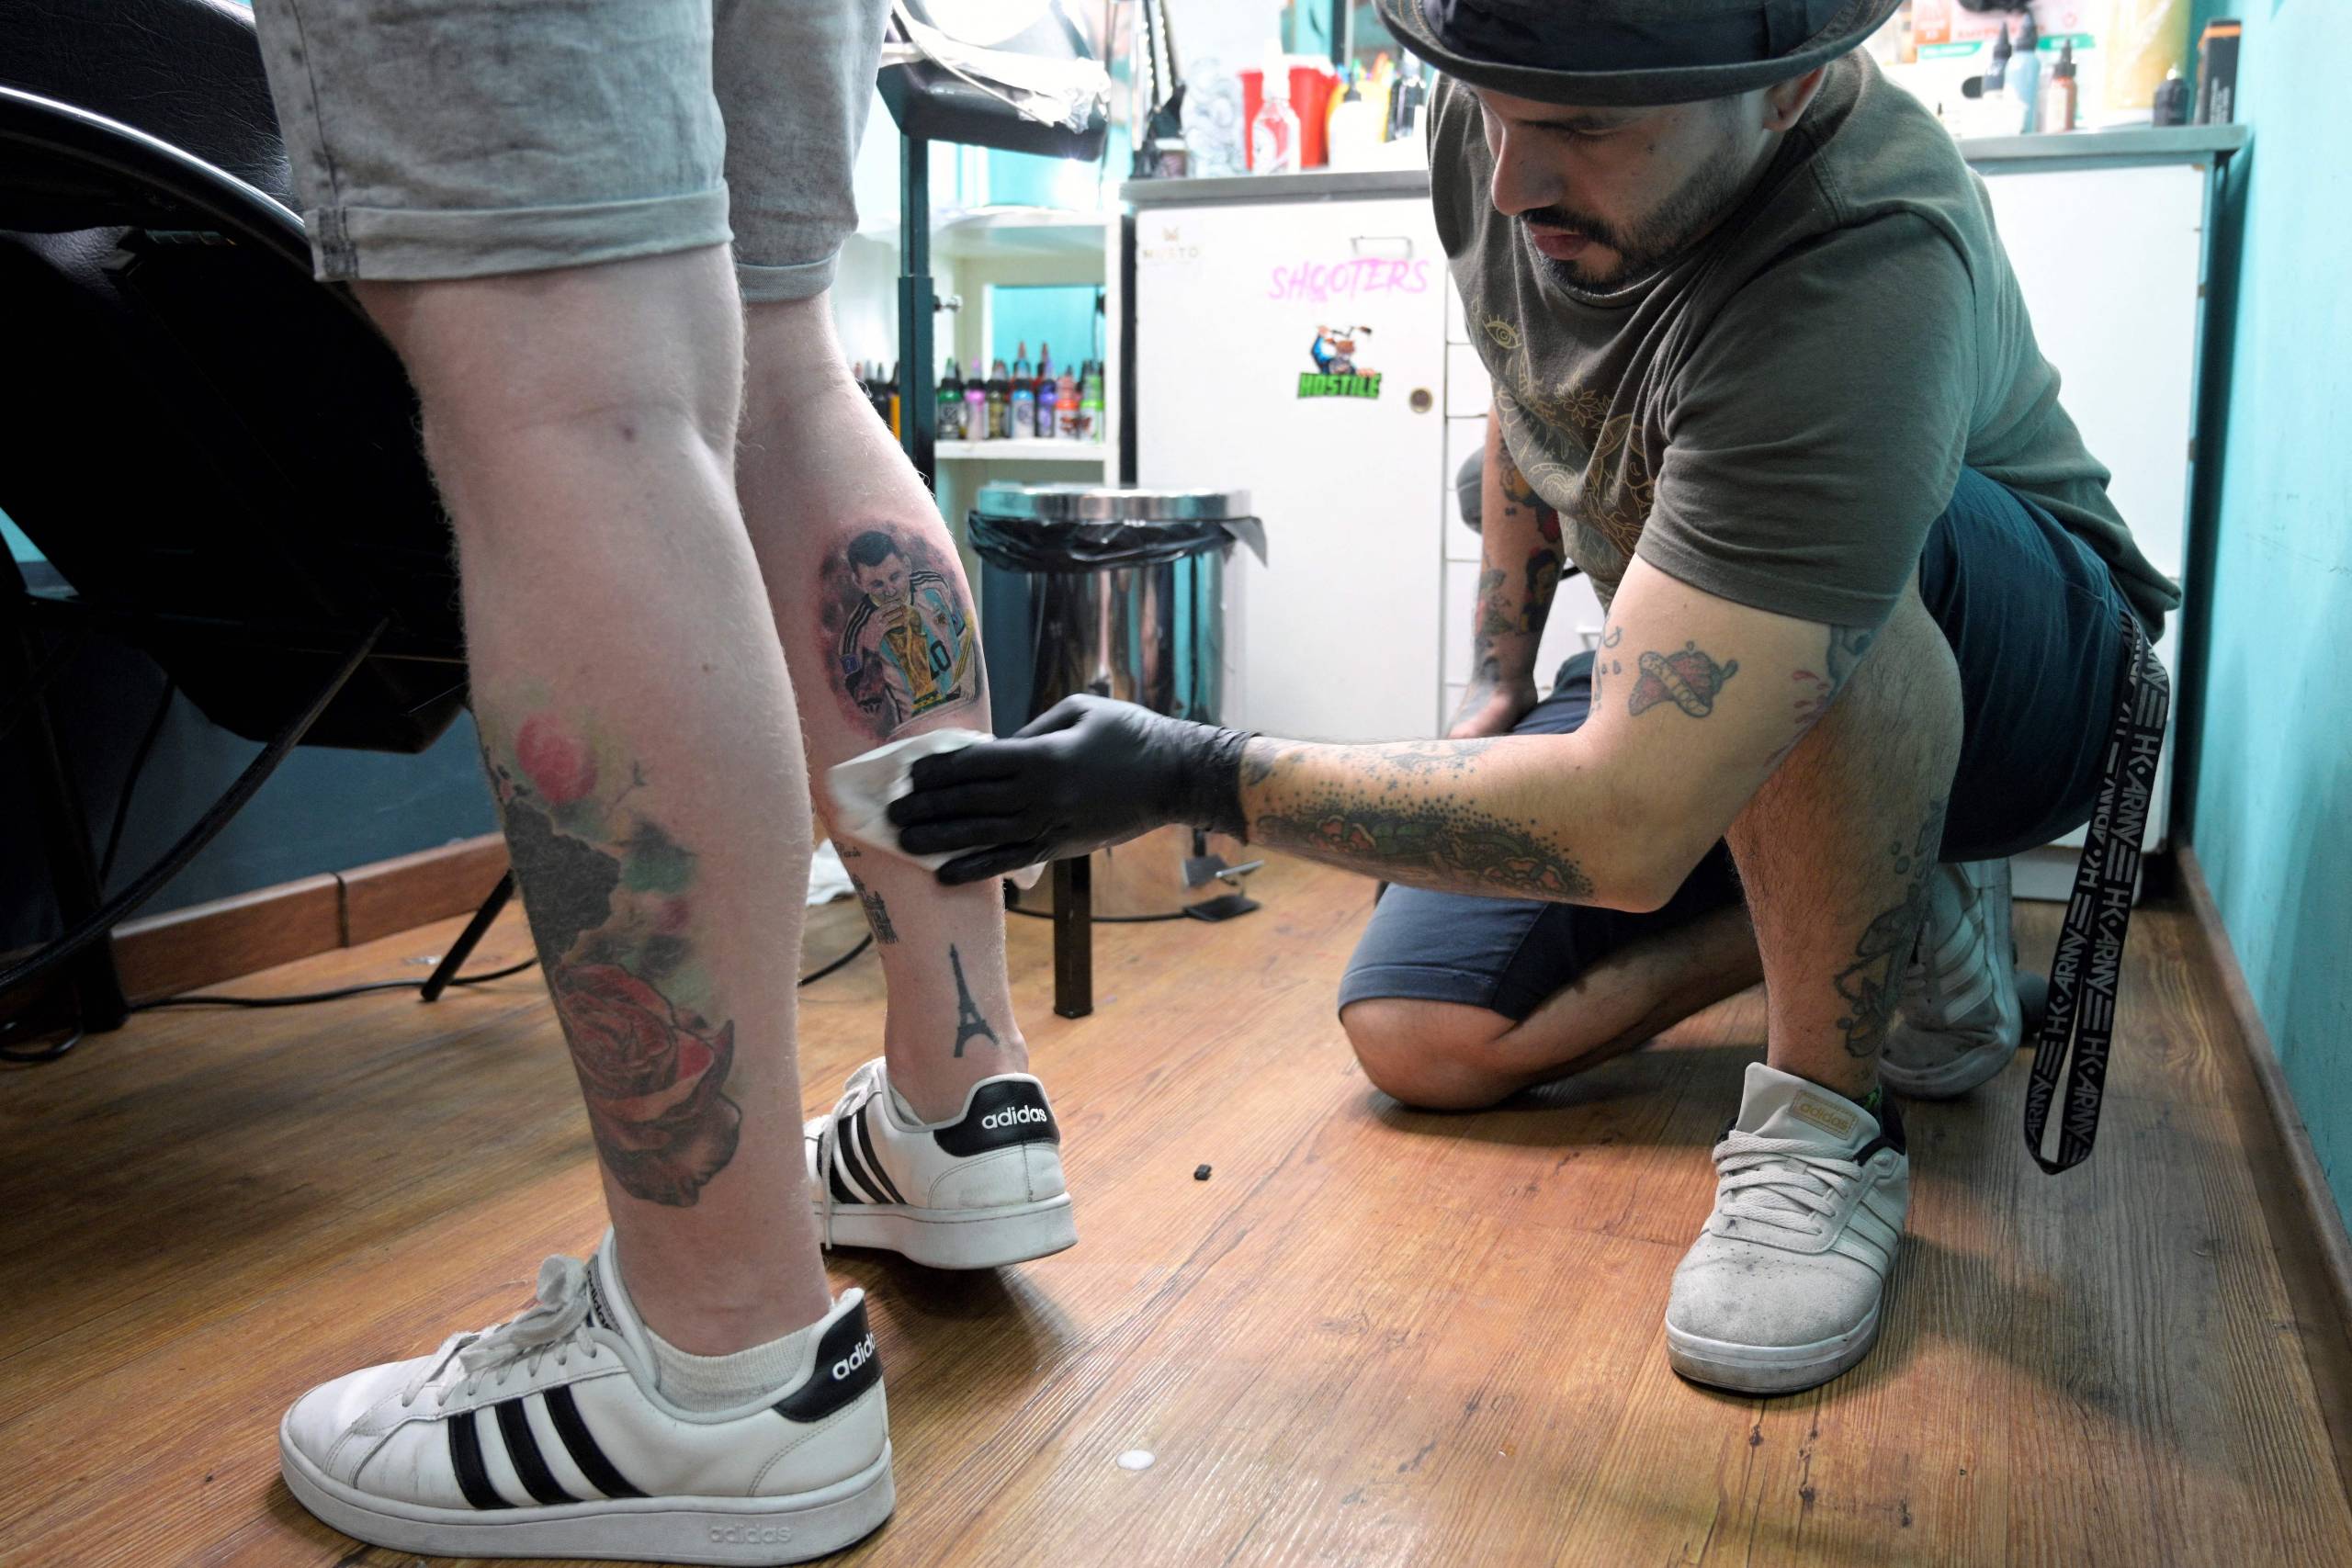 A tattoo artist crouches with one knee on the floor to wipe down a new tattoo on the back of a man's leg.